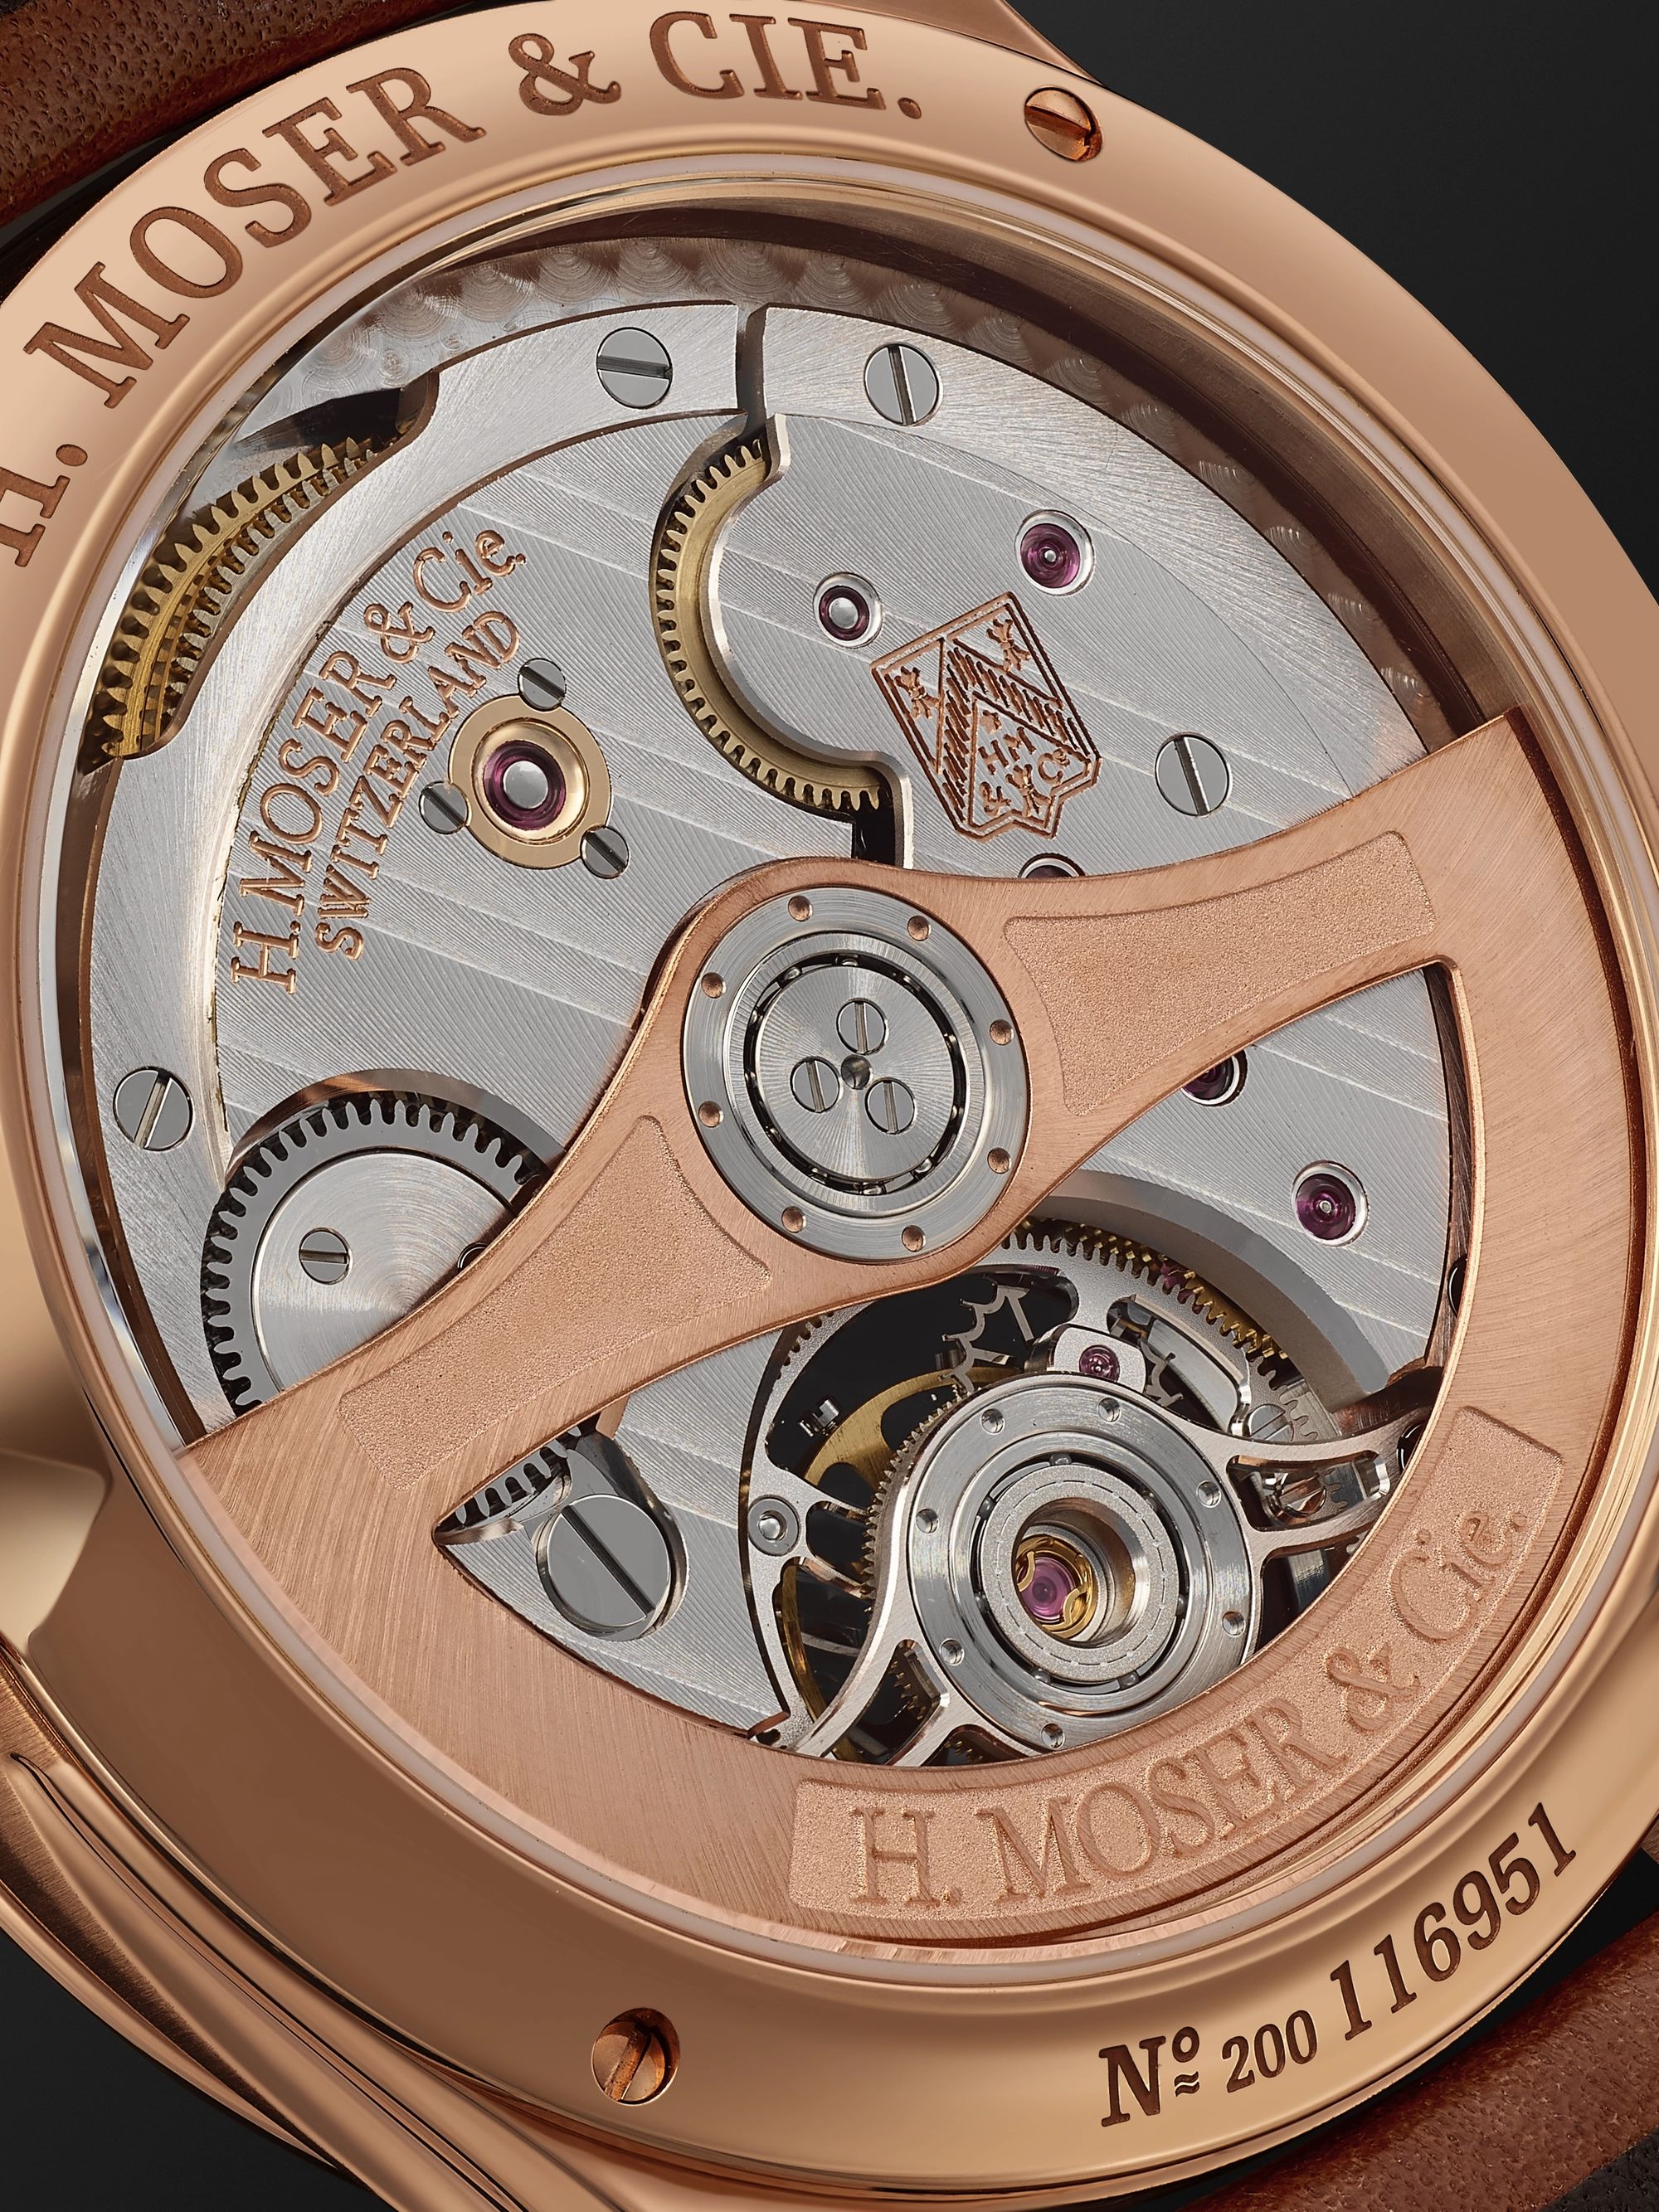 H. MOSER & CIE. Endeavour Tourbillion Ox's Eye Automatic 40mm 18-Karat Red Gold and Leather Watch, Ref. No. 1804-0401